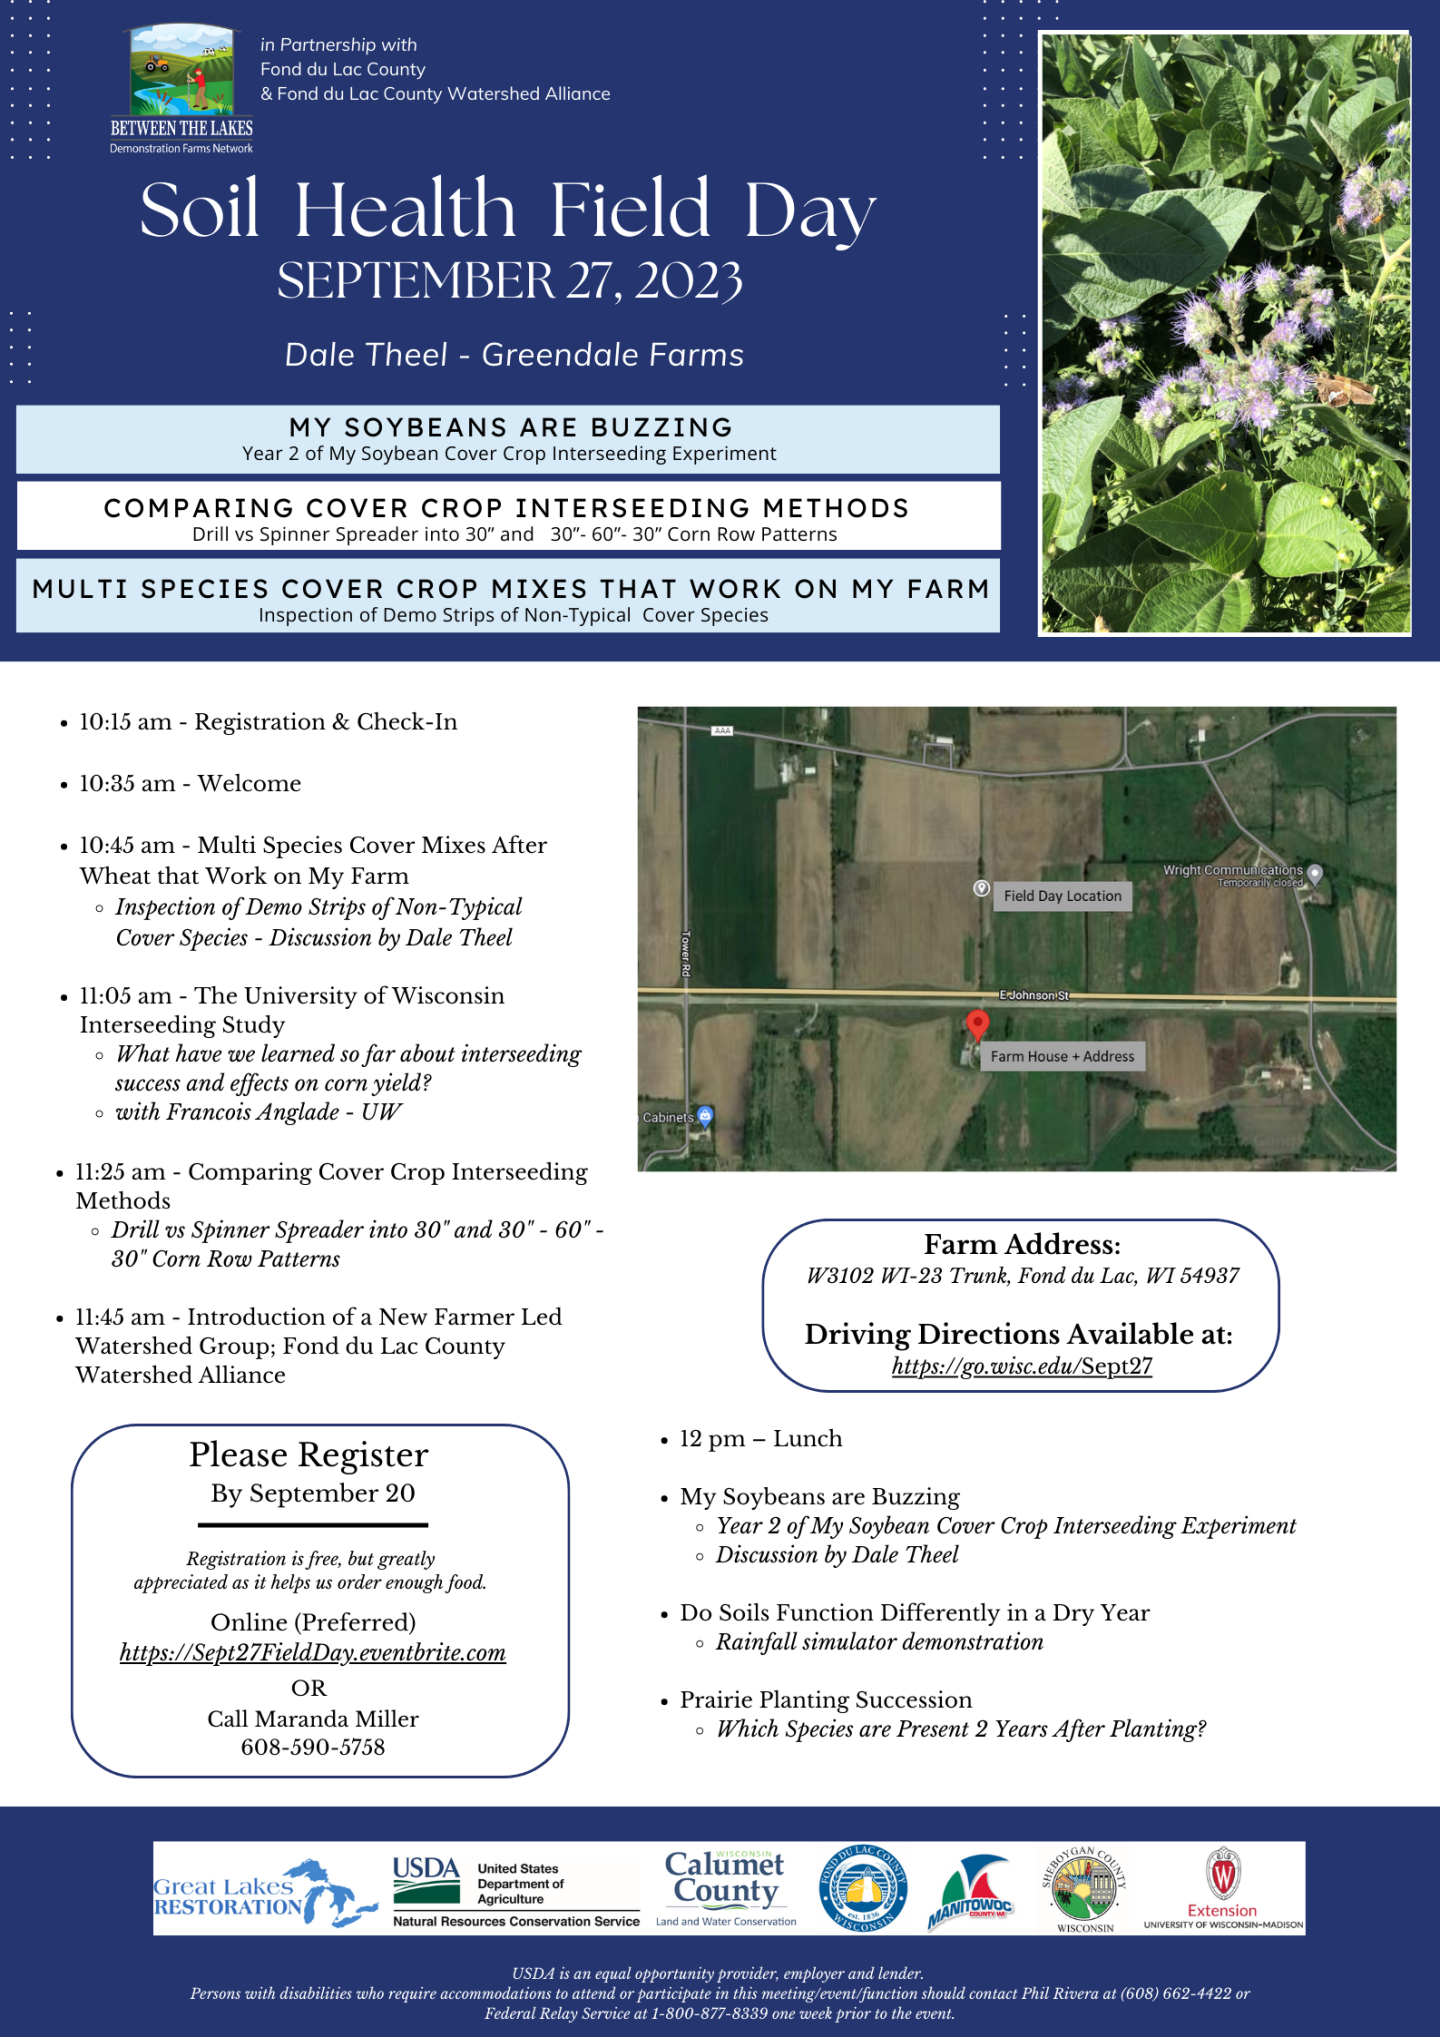 Soil Health Field Day infographic